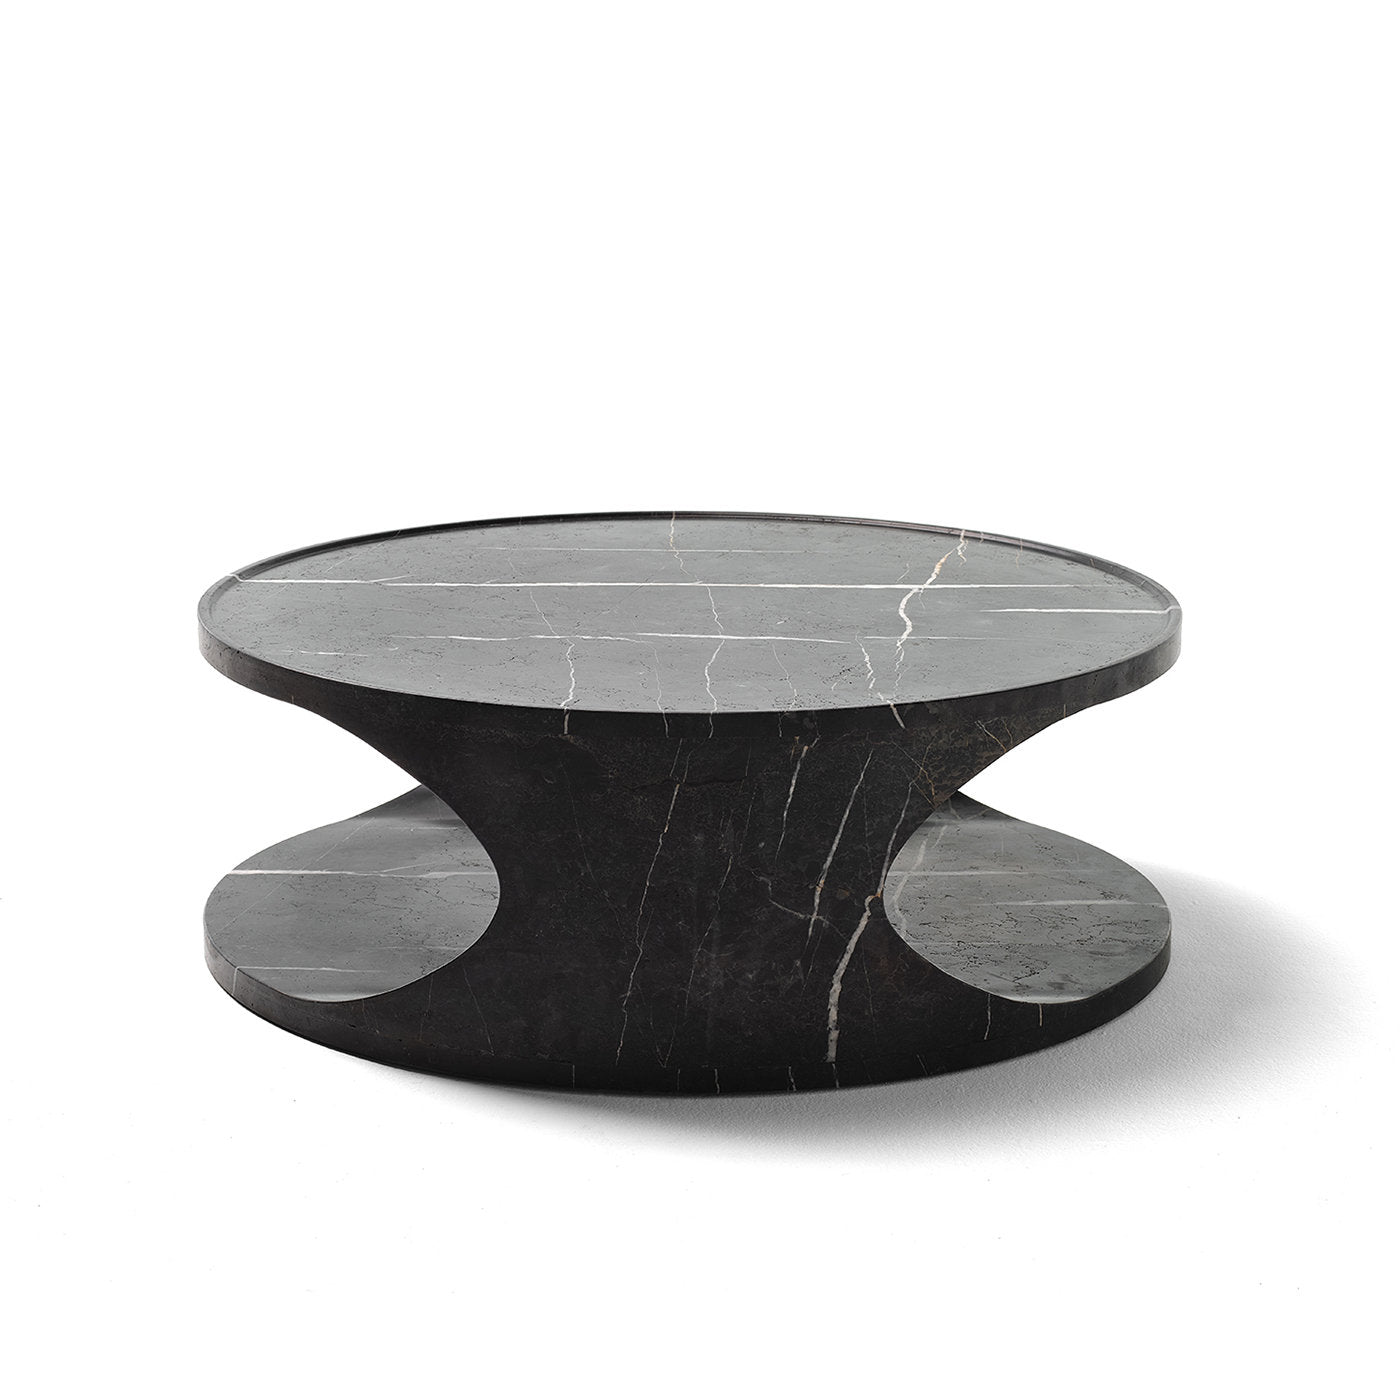 Roll Saint Laurent Marble Coffee Table by Federico Carandini - Alternative view 1